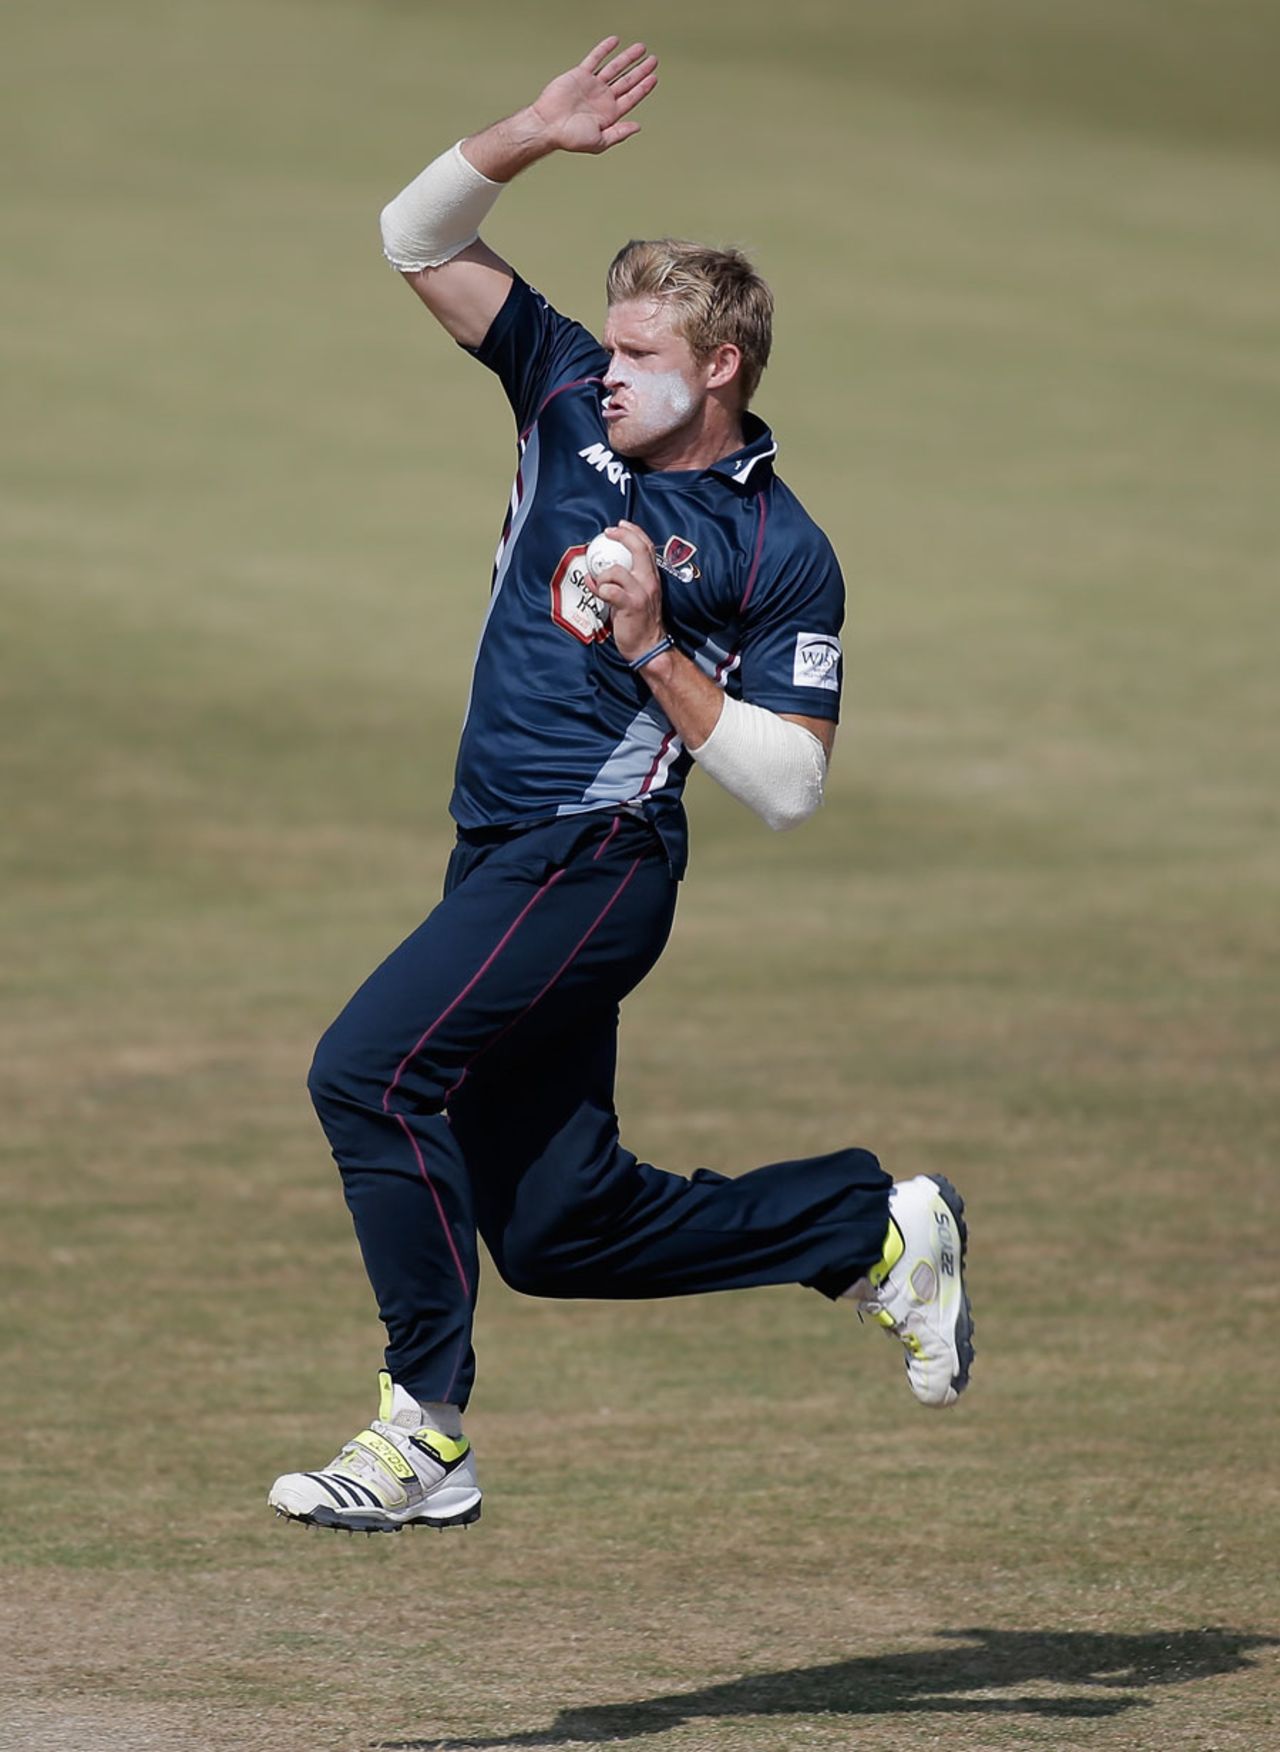 David Willey took 4 for 32 from his four overs, Gloucestershire v Northamptonshire, FLt20 Midlands/Wales/West Group, Cheltenham, July 16, 2013